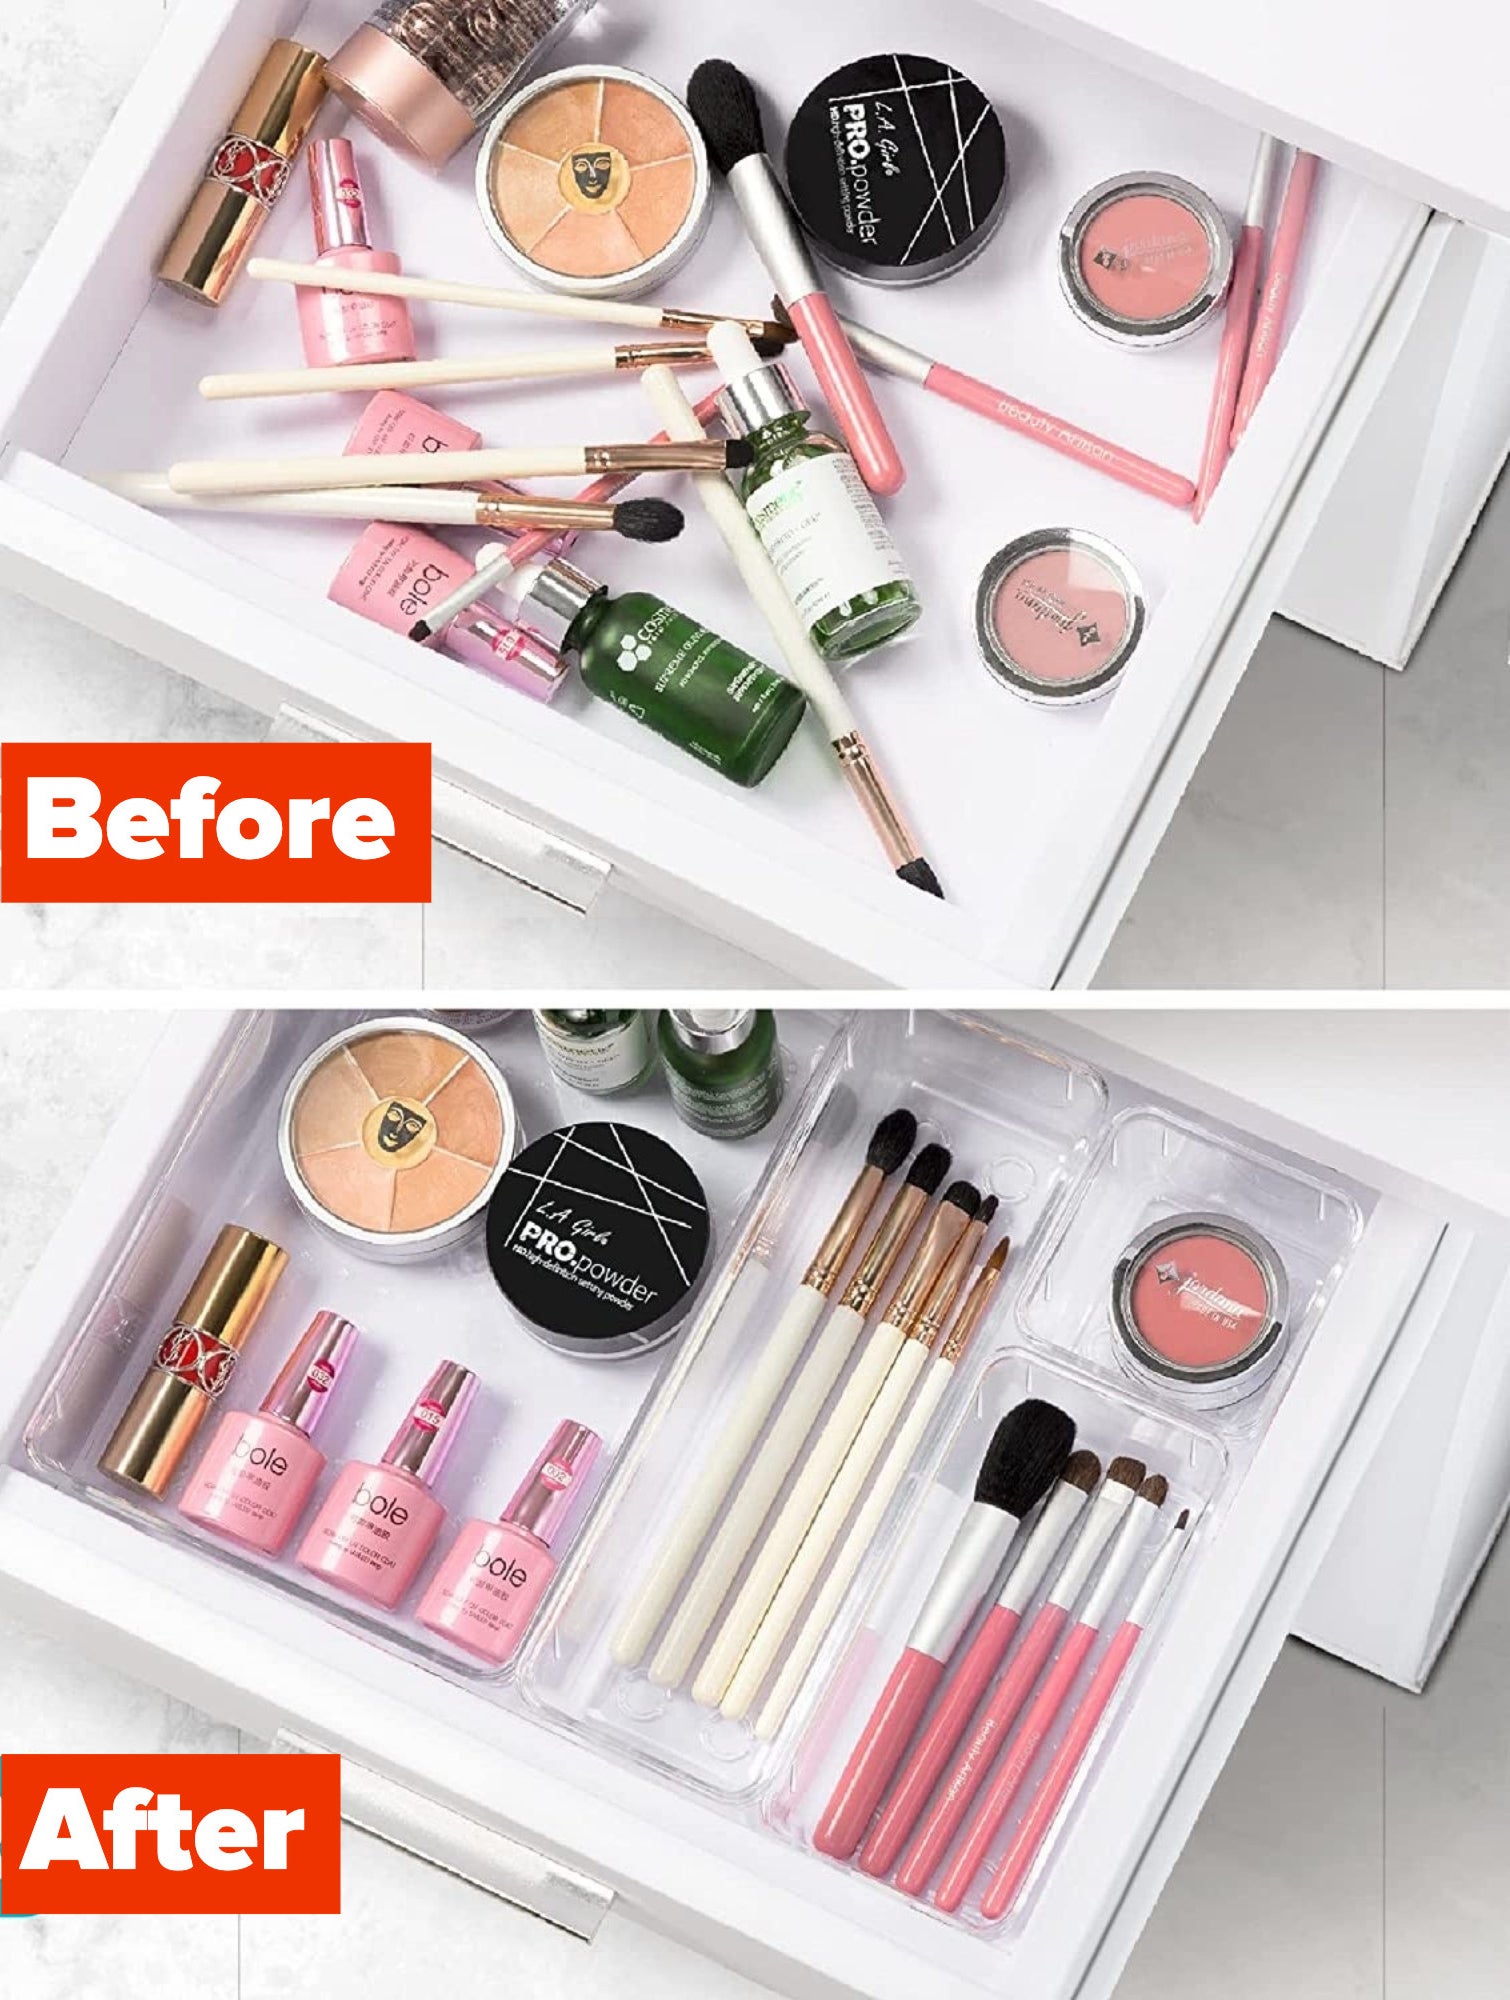 the before and after images of a cosmetics drawer